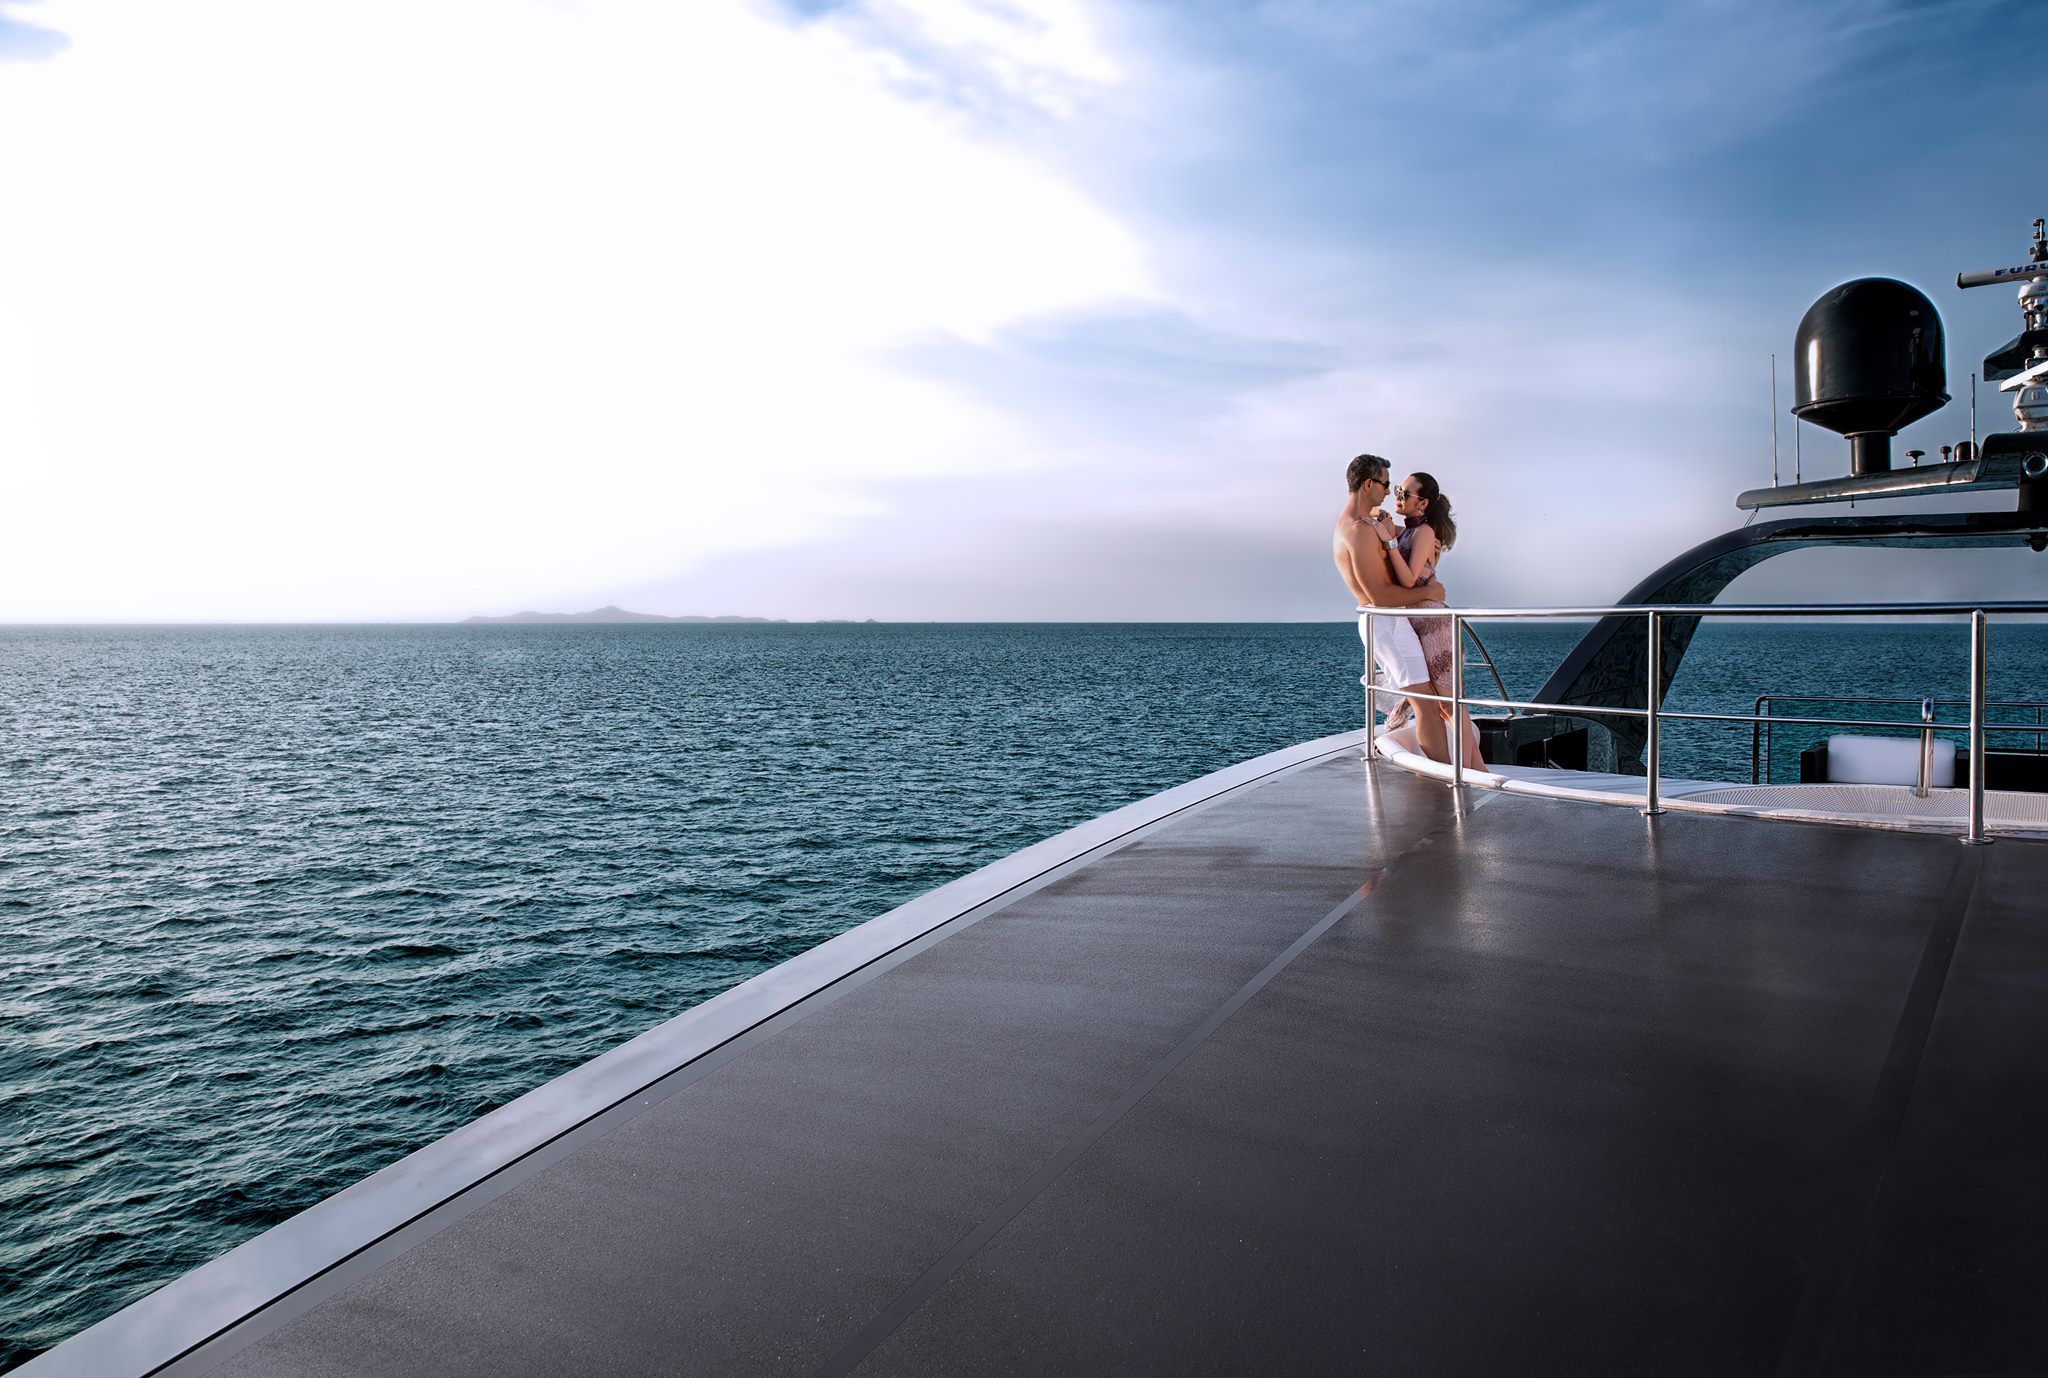 Couple on a private romantic boat trip in Koh Samui, one of the best destinations for a couples holiday.